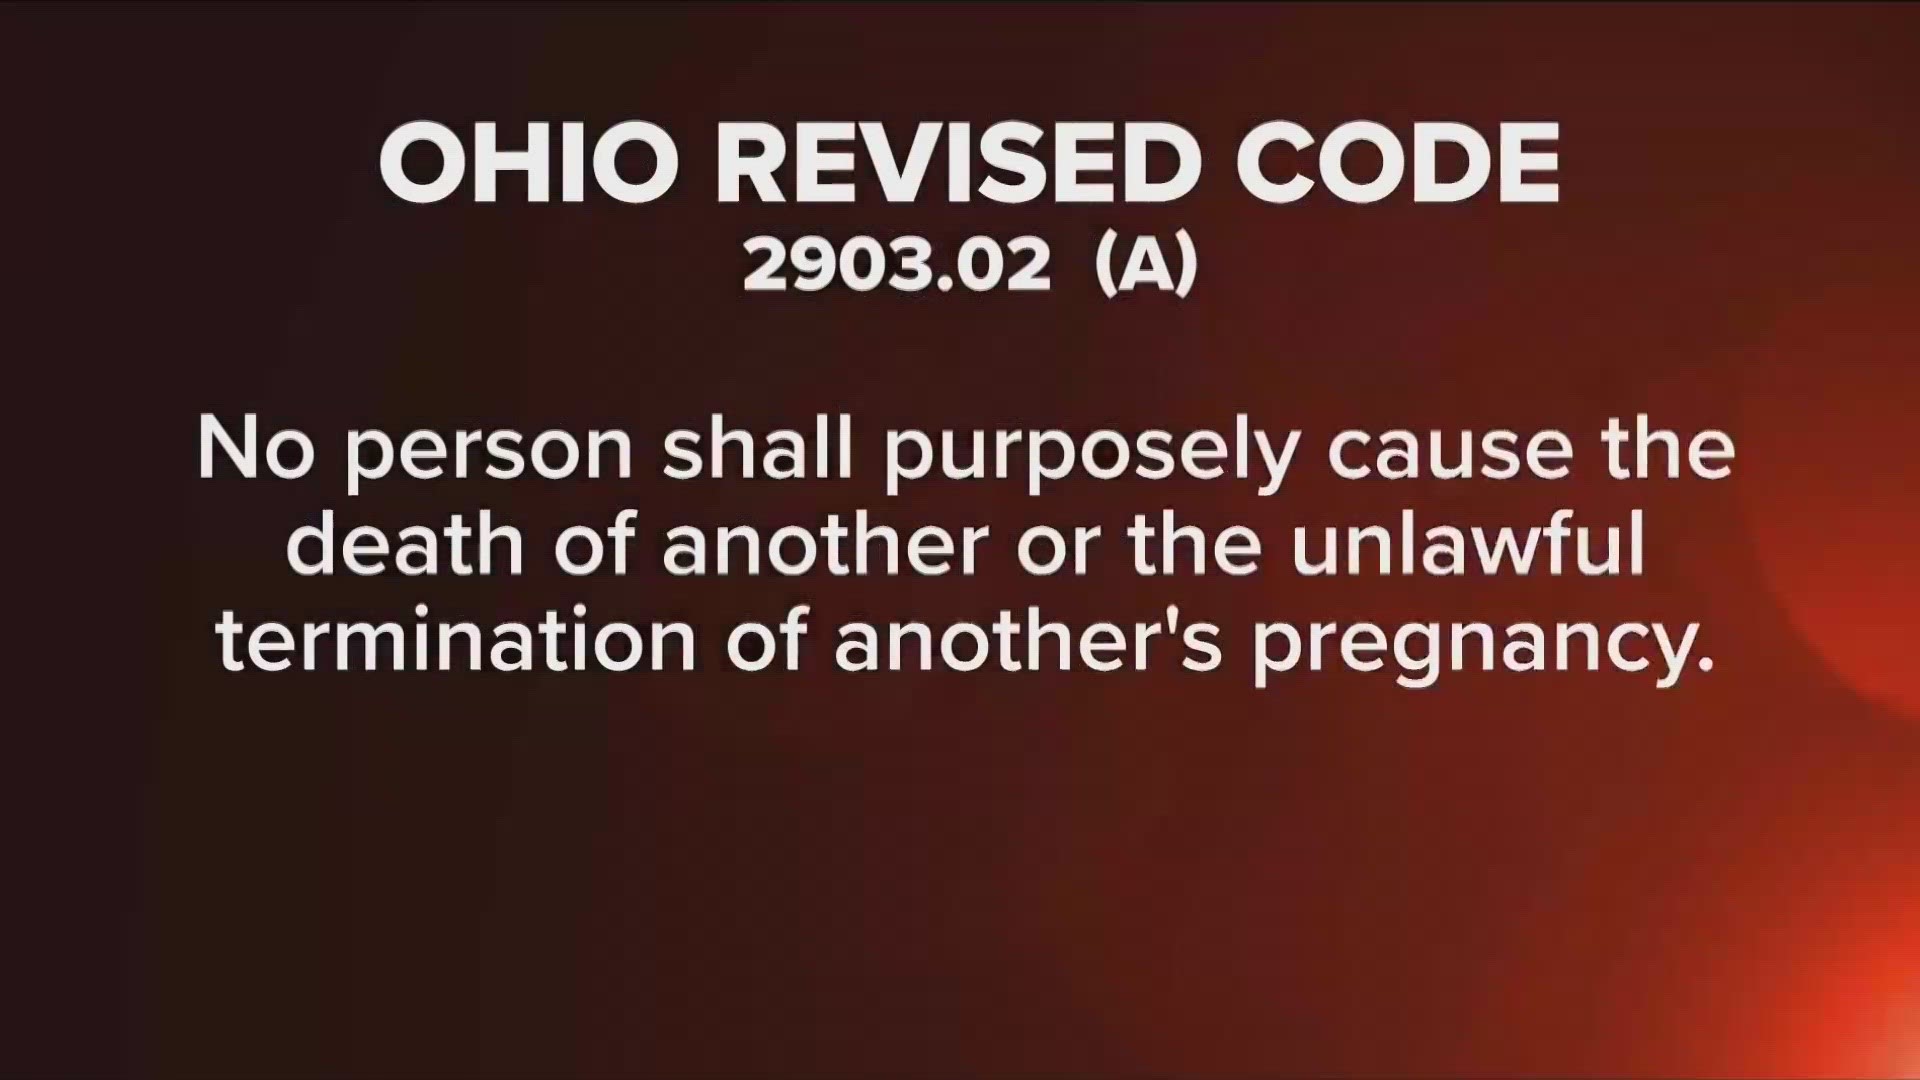 WTOL 11 examines legal questions surrounding the shooting of 34-year-old Tameisha Price, who was pregnant at the time of her death.